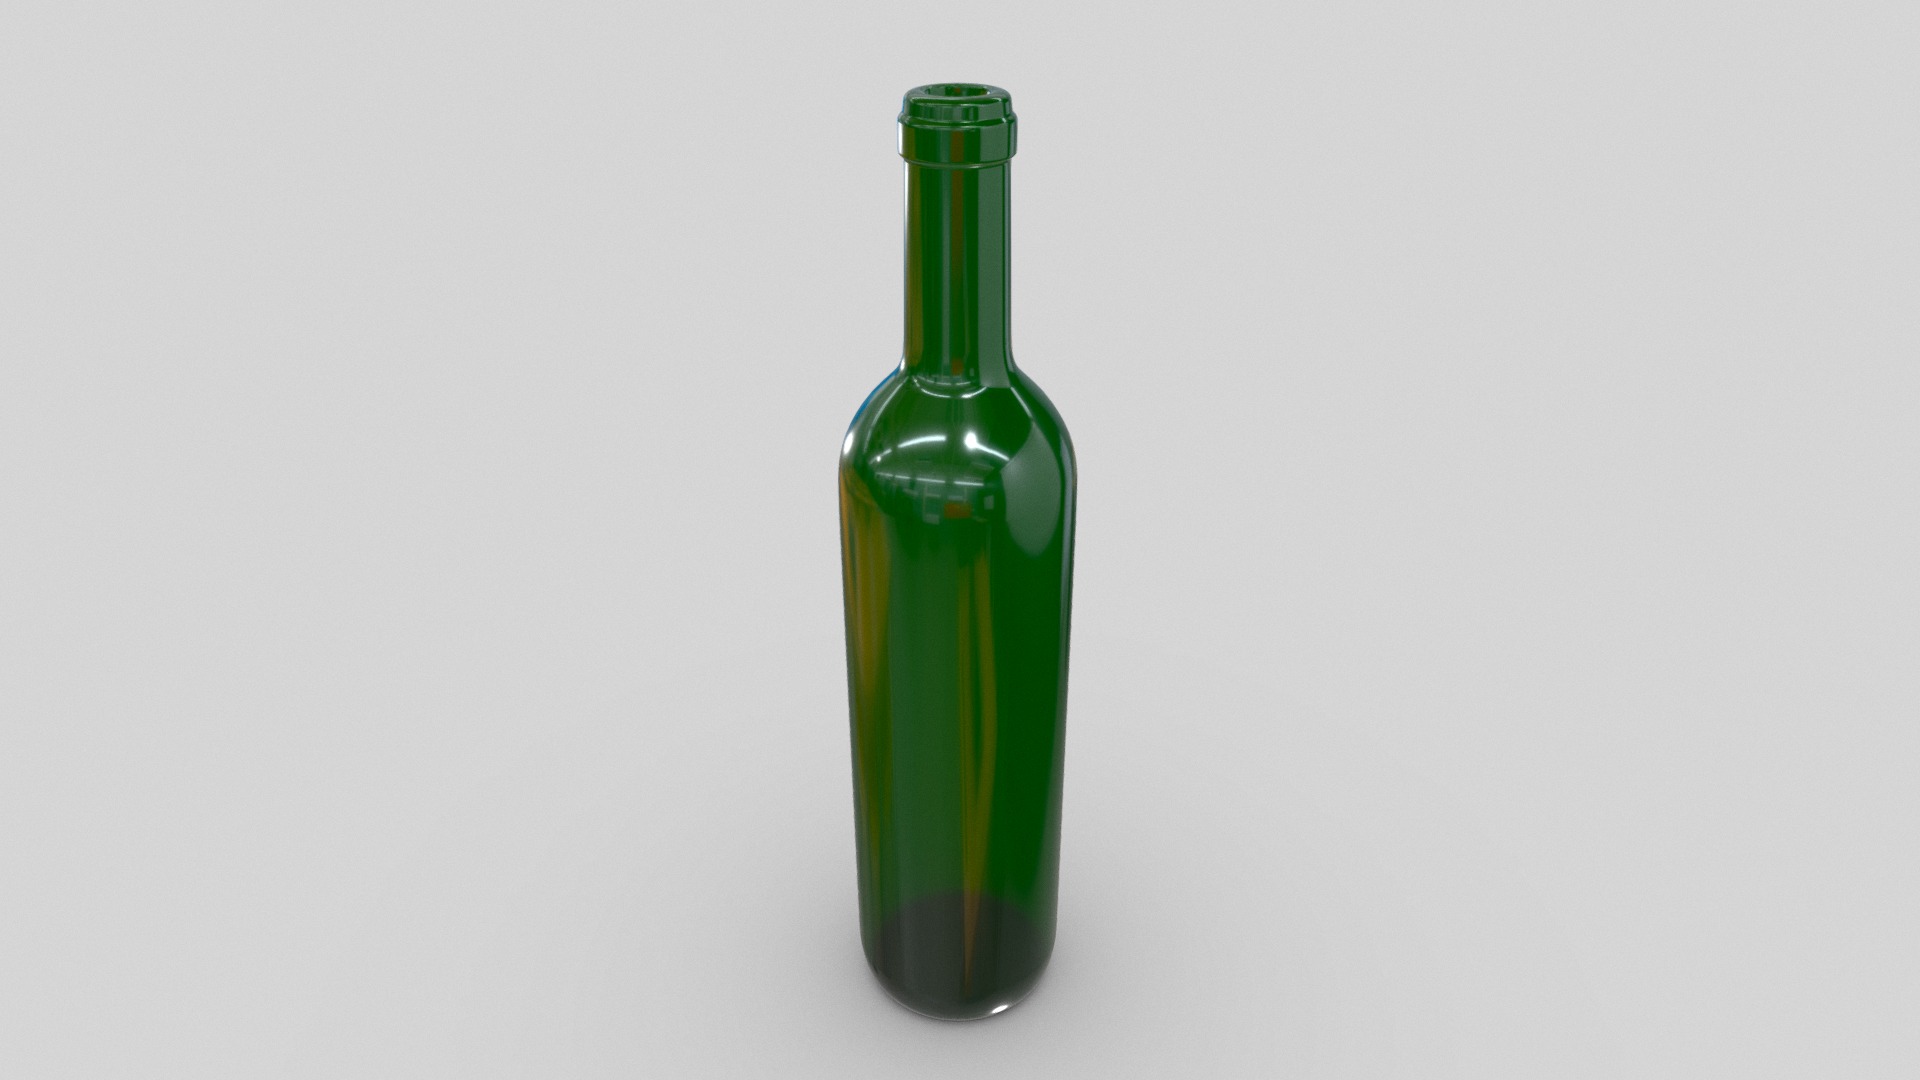 3D model Bottle empty green glass - This is a 3D model of the Bottle empty green glass. The 3D model is about a green glass bottle.